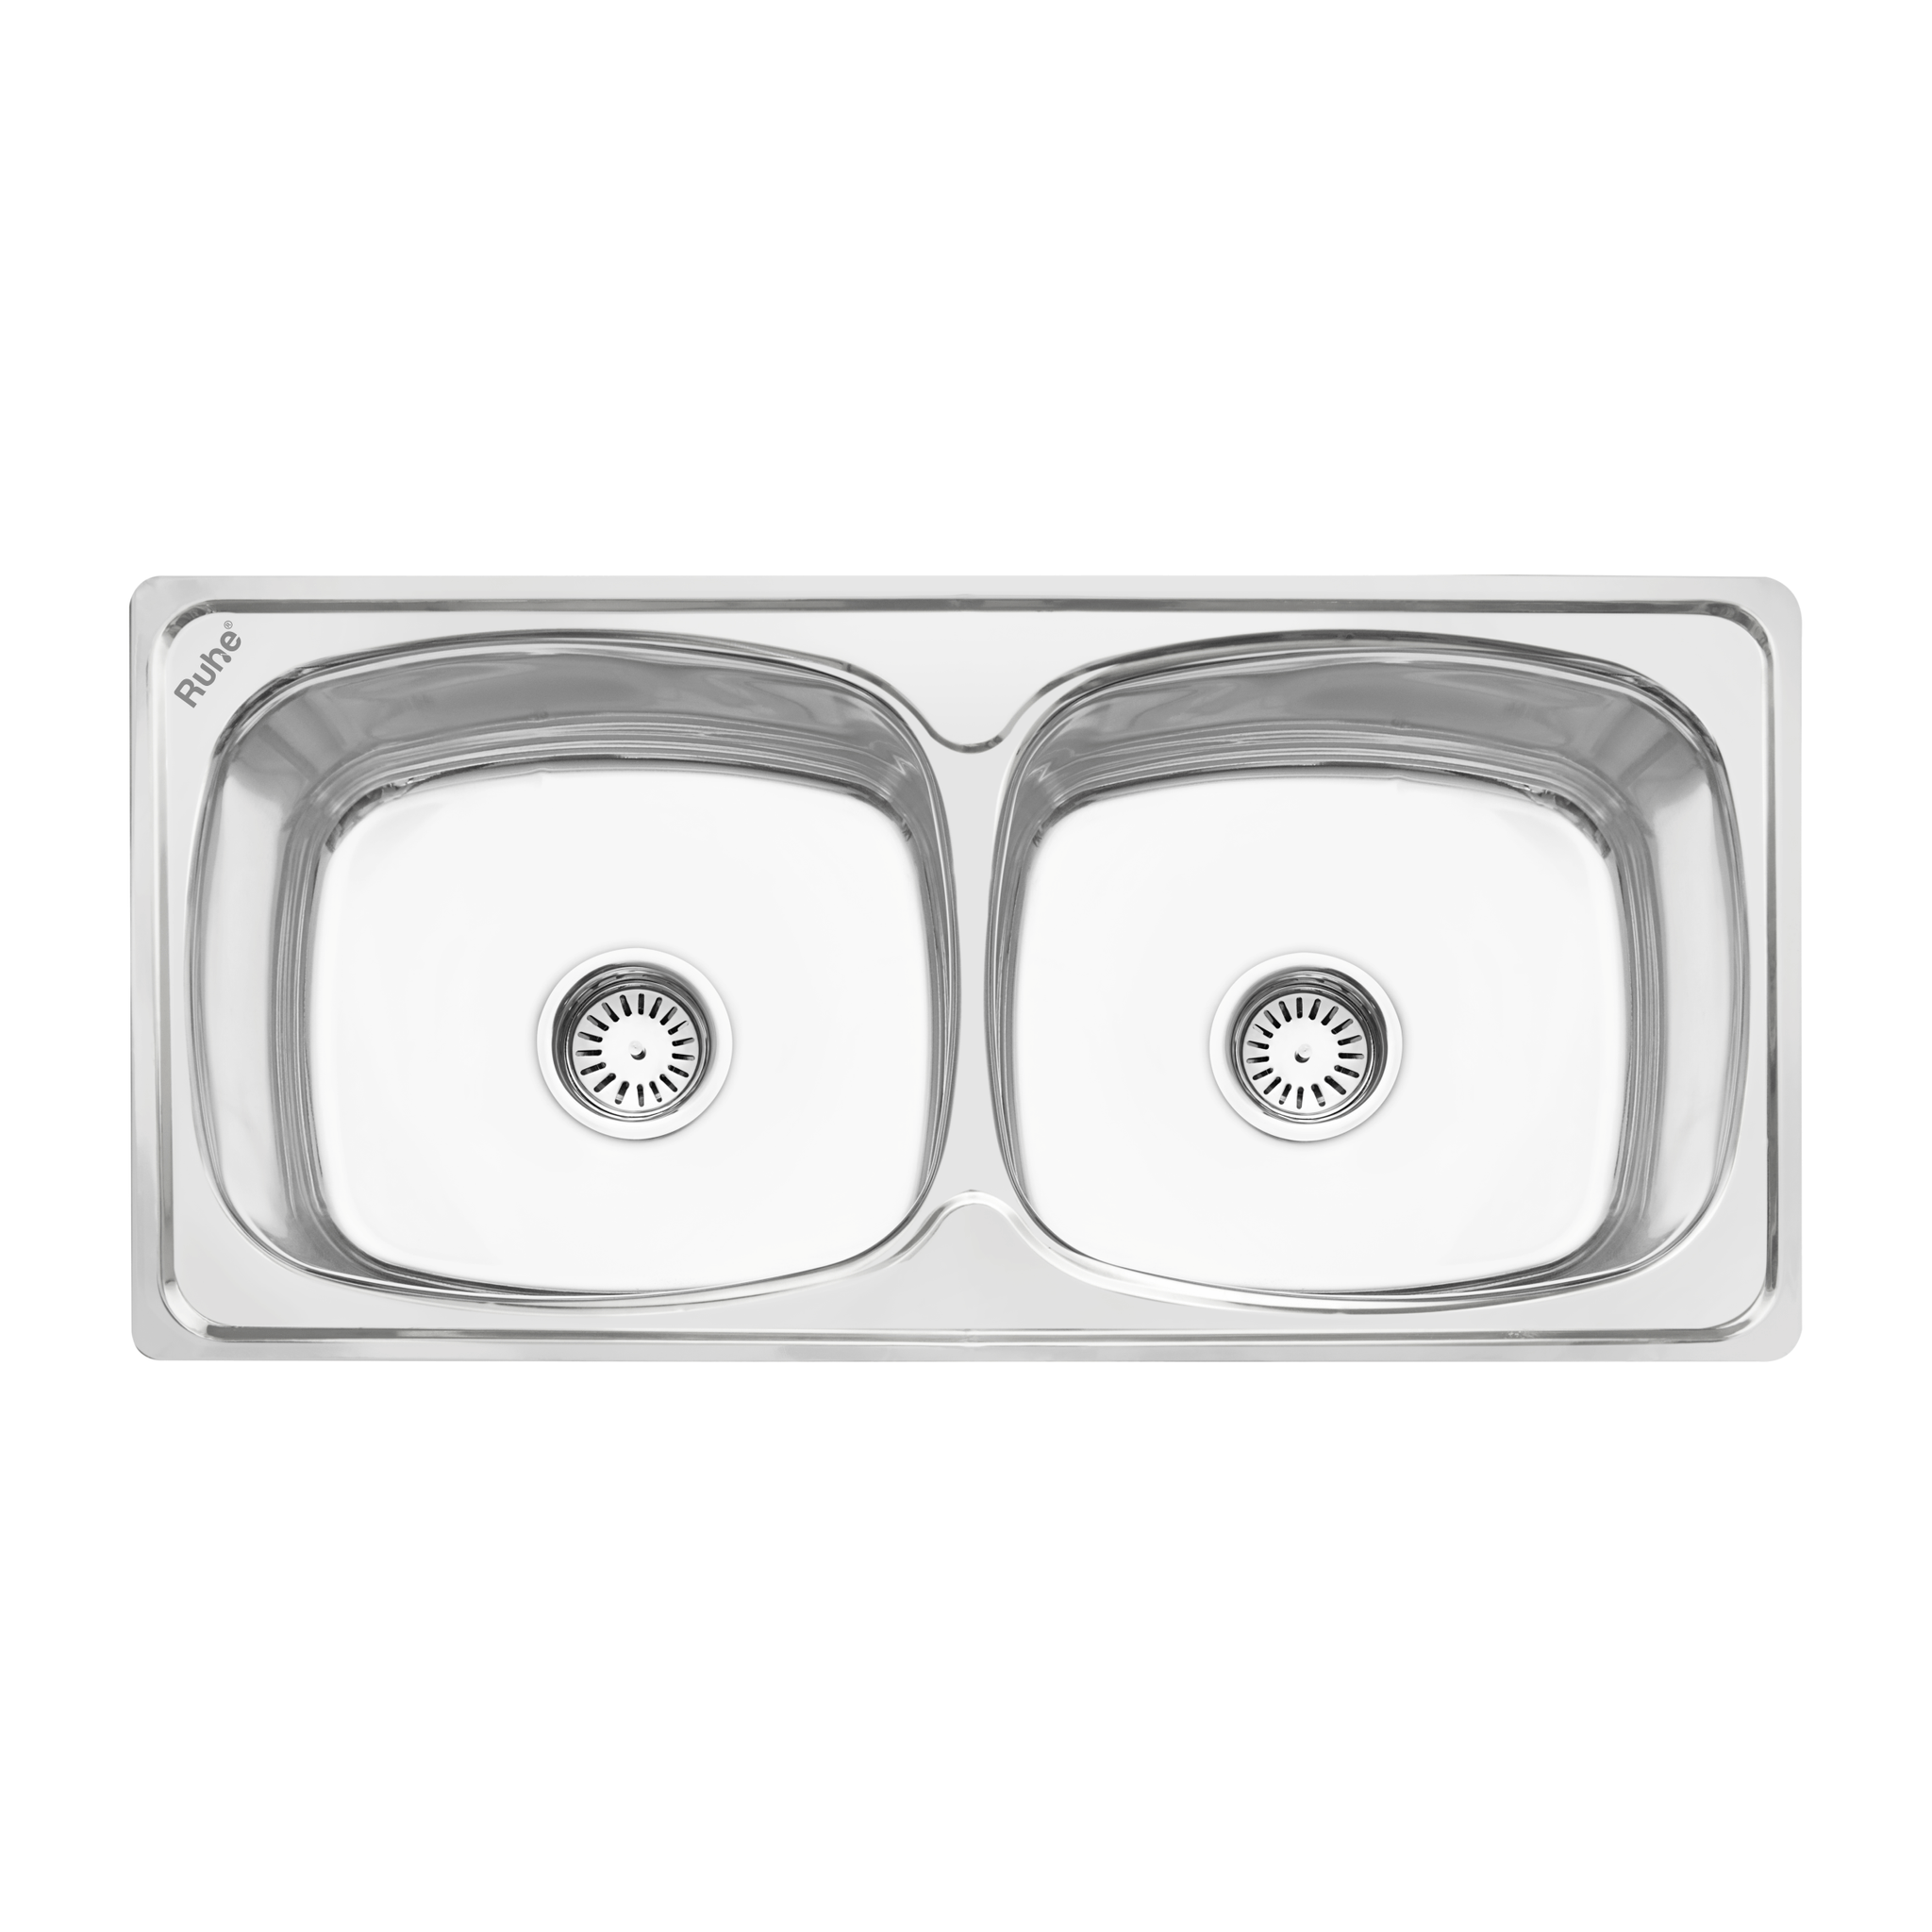 Oval Double Bowl (45 x 20 x 9 inches) Kitchen Sink - by Ruhe®